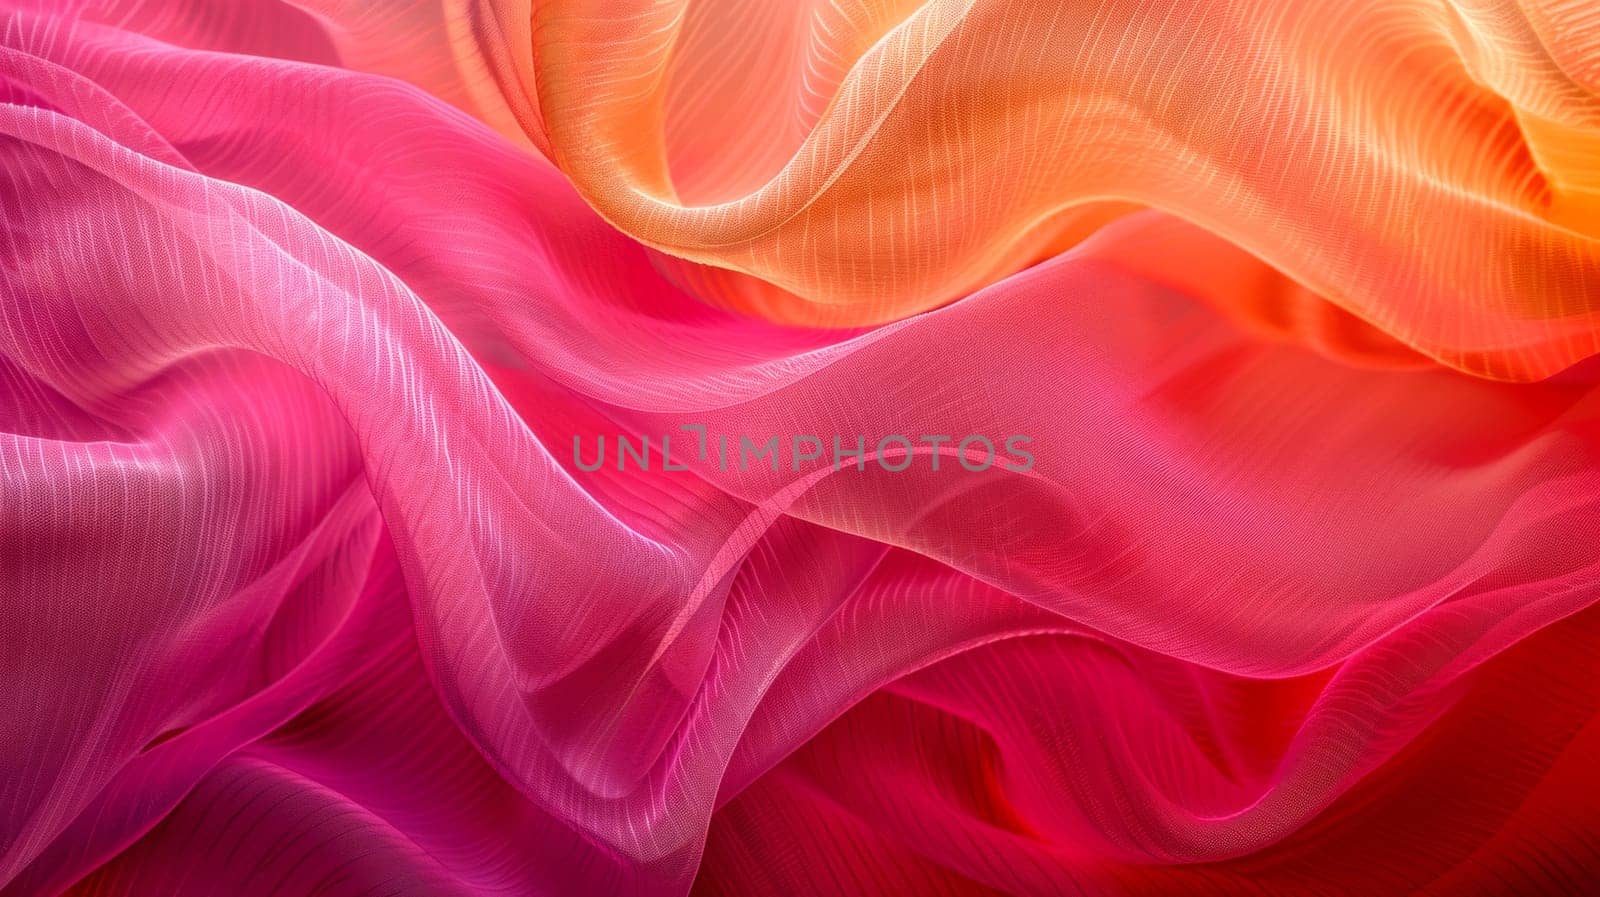 A close up of a colorful fabric with wavy lines